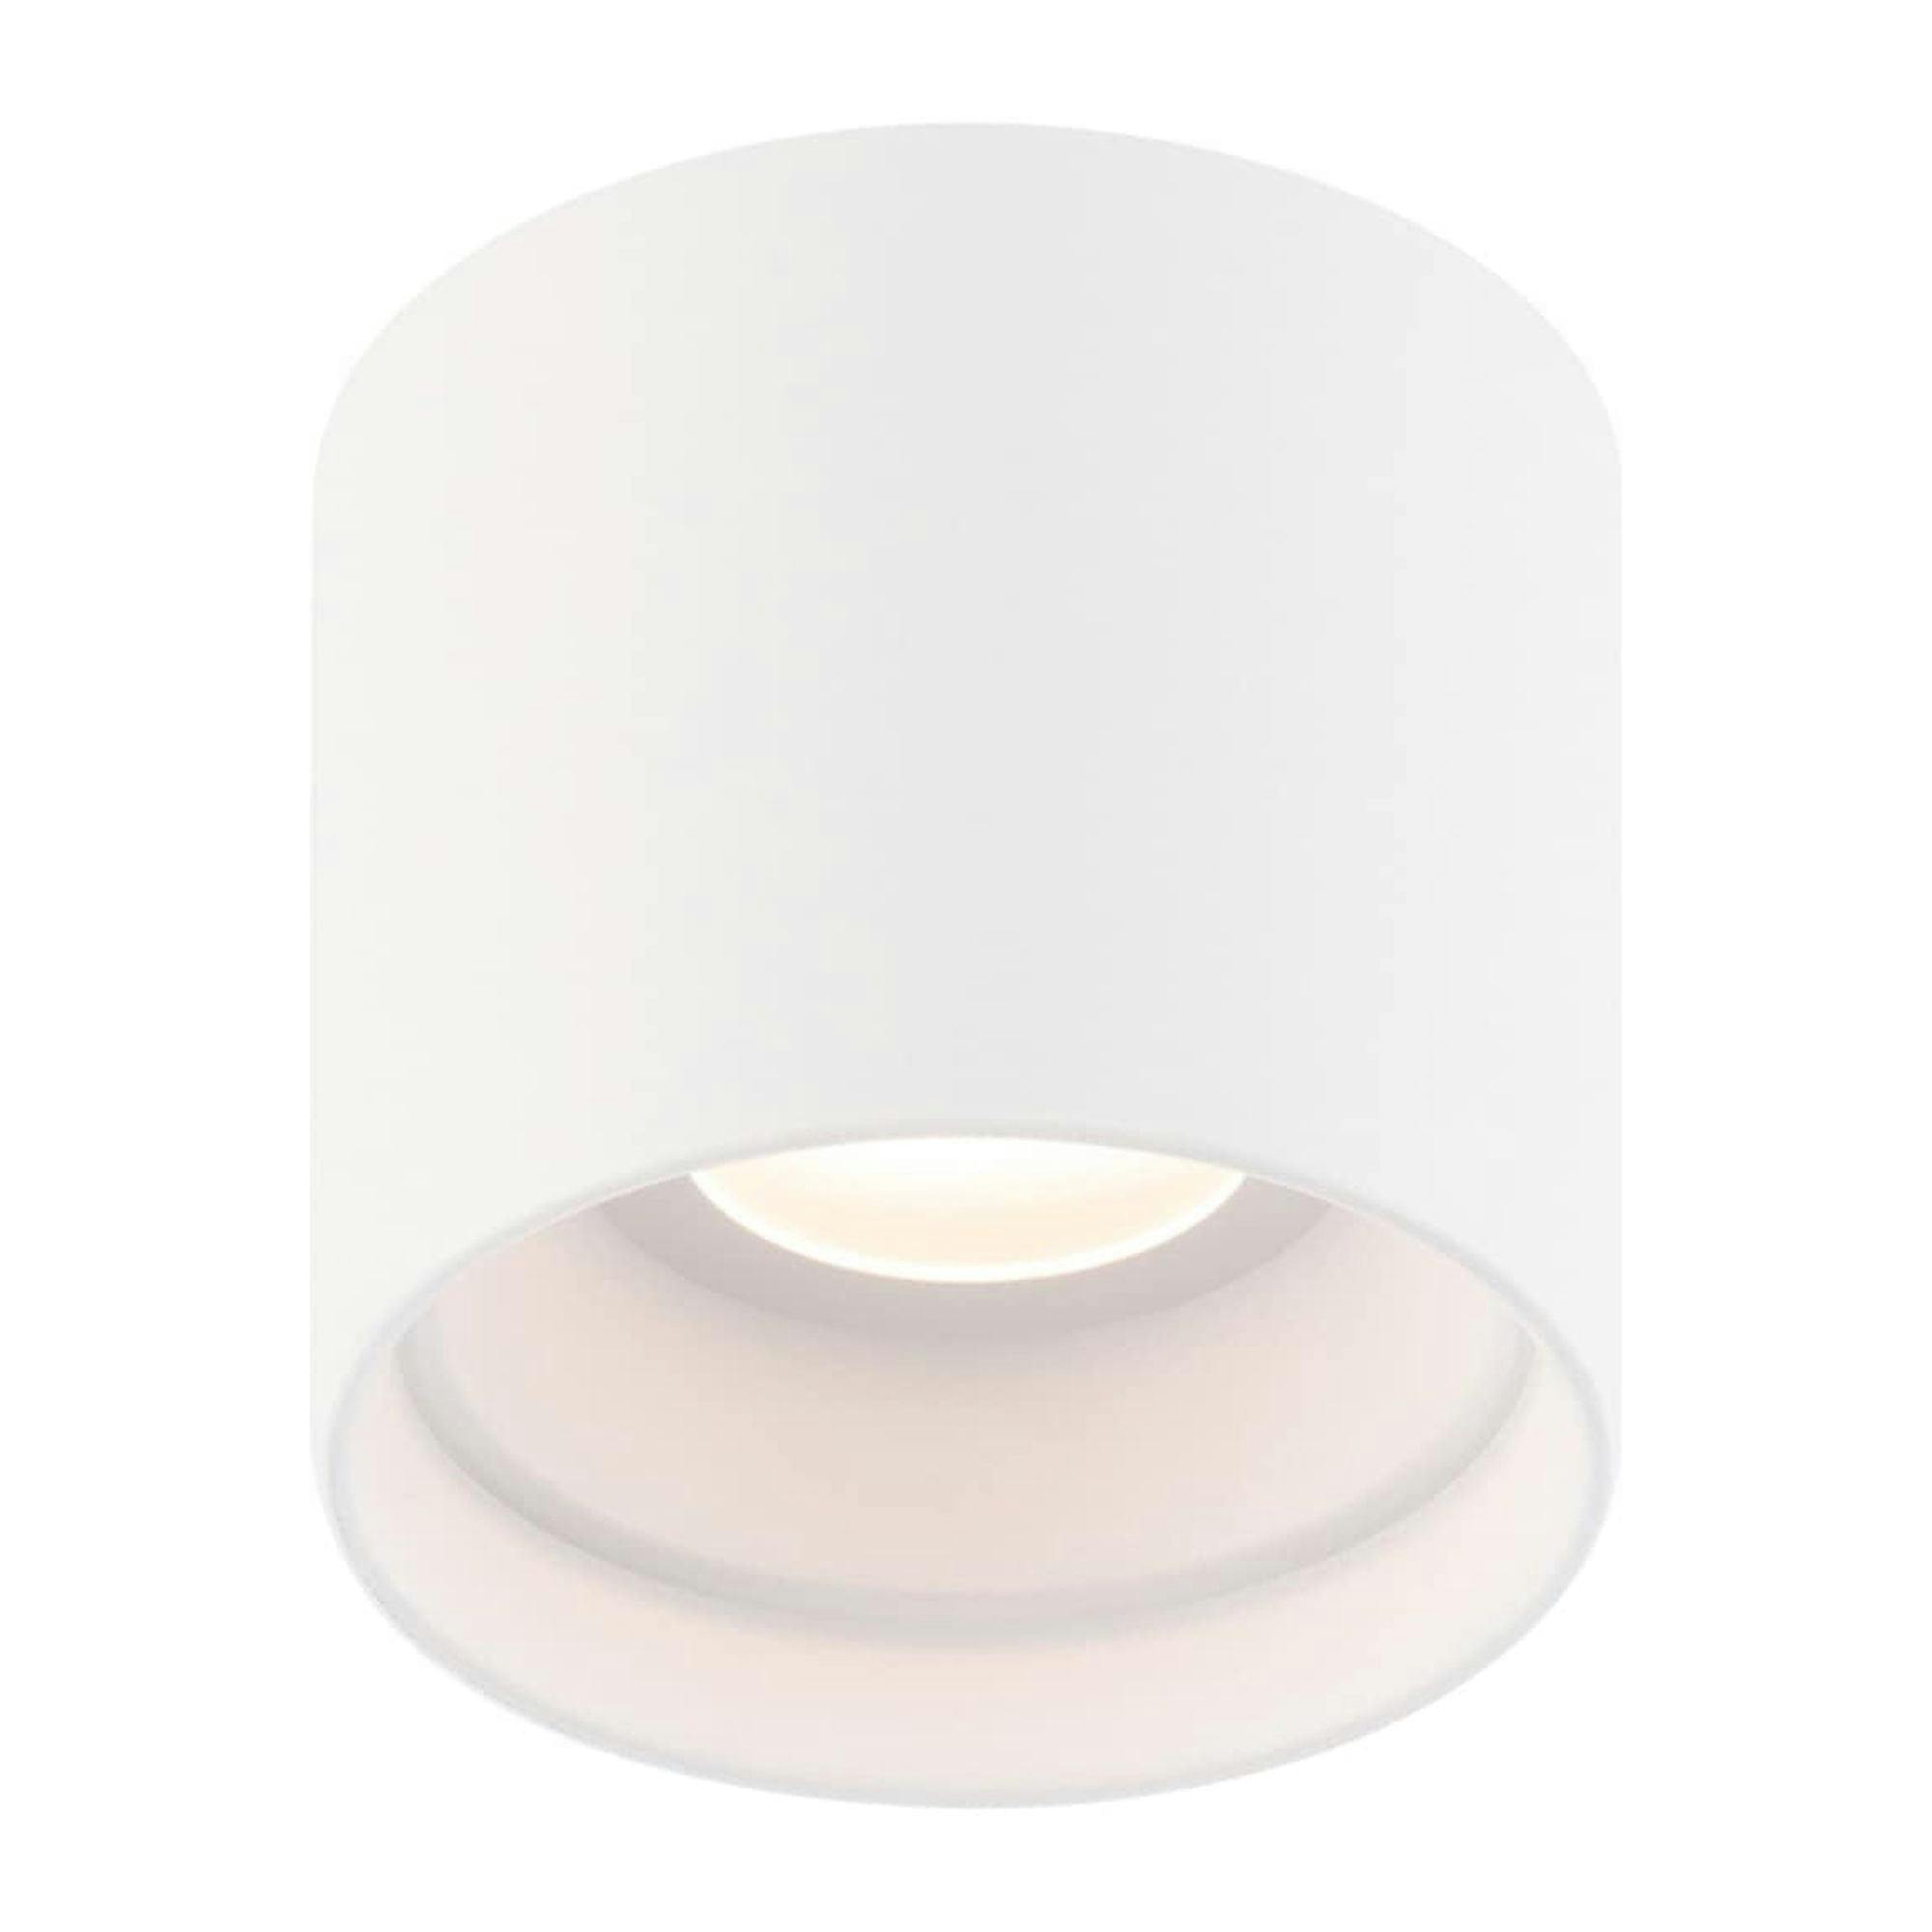 Downtown Matte White 5" LED Flush Mount for Indoor/Outdoor